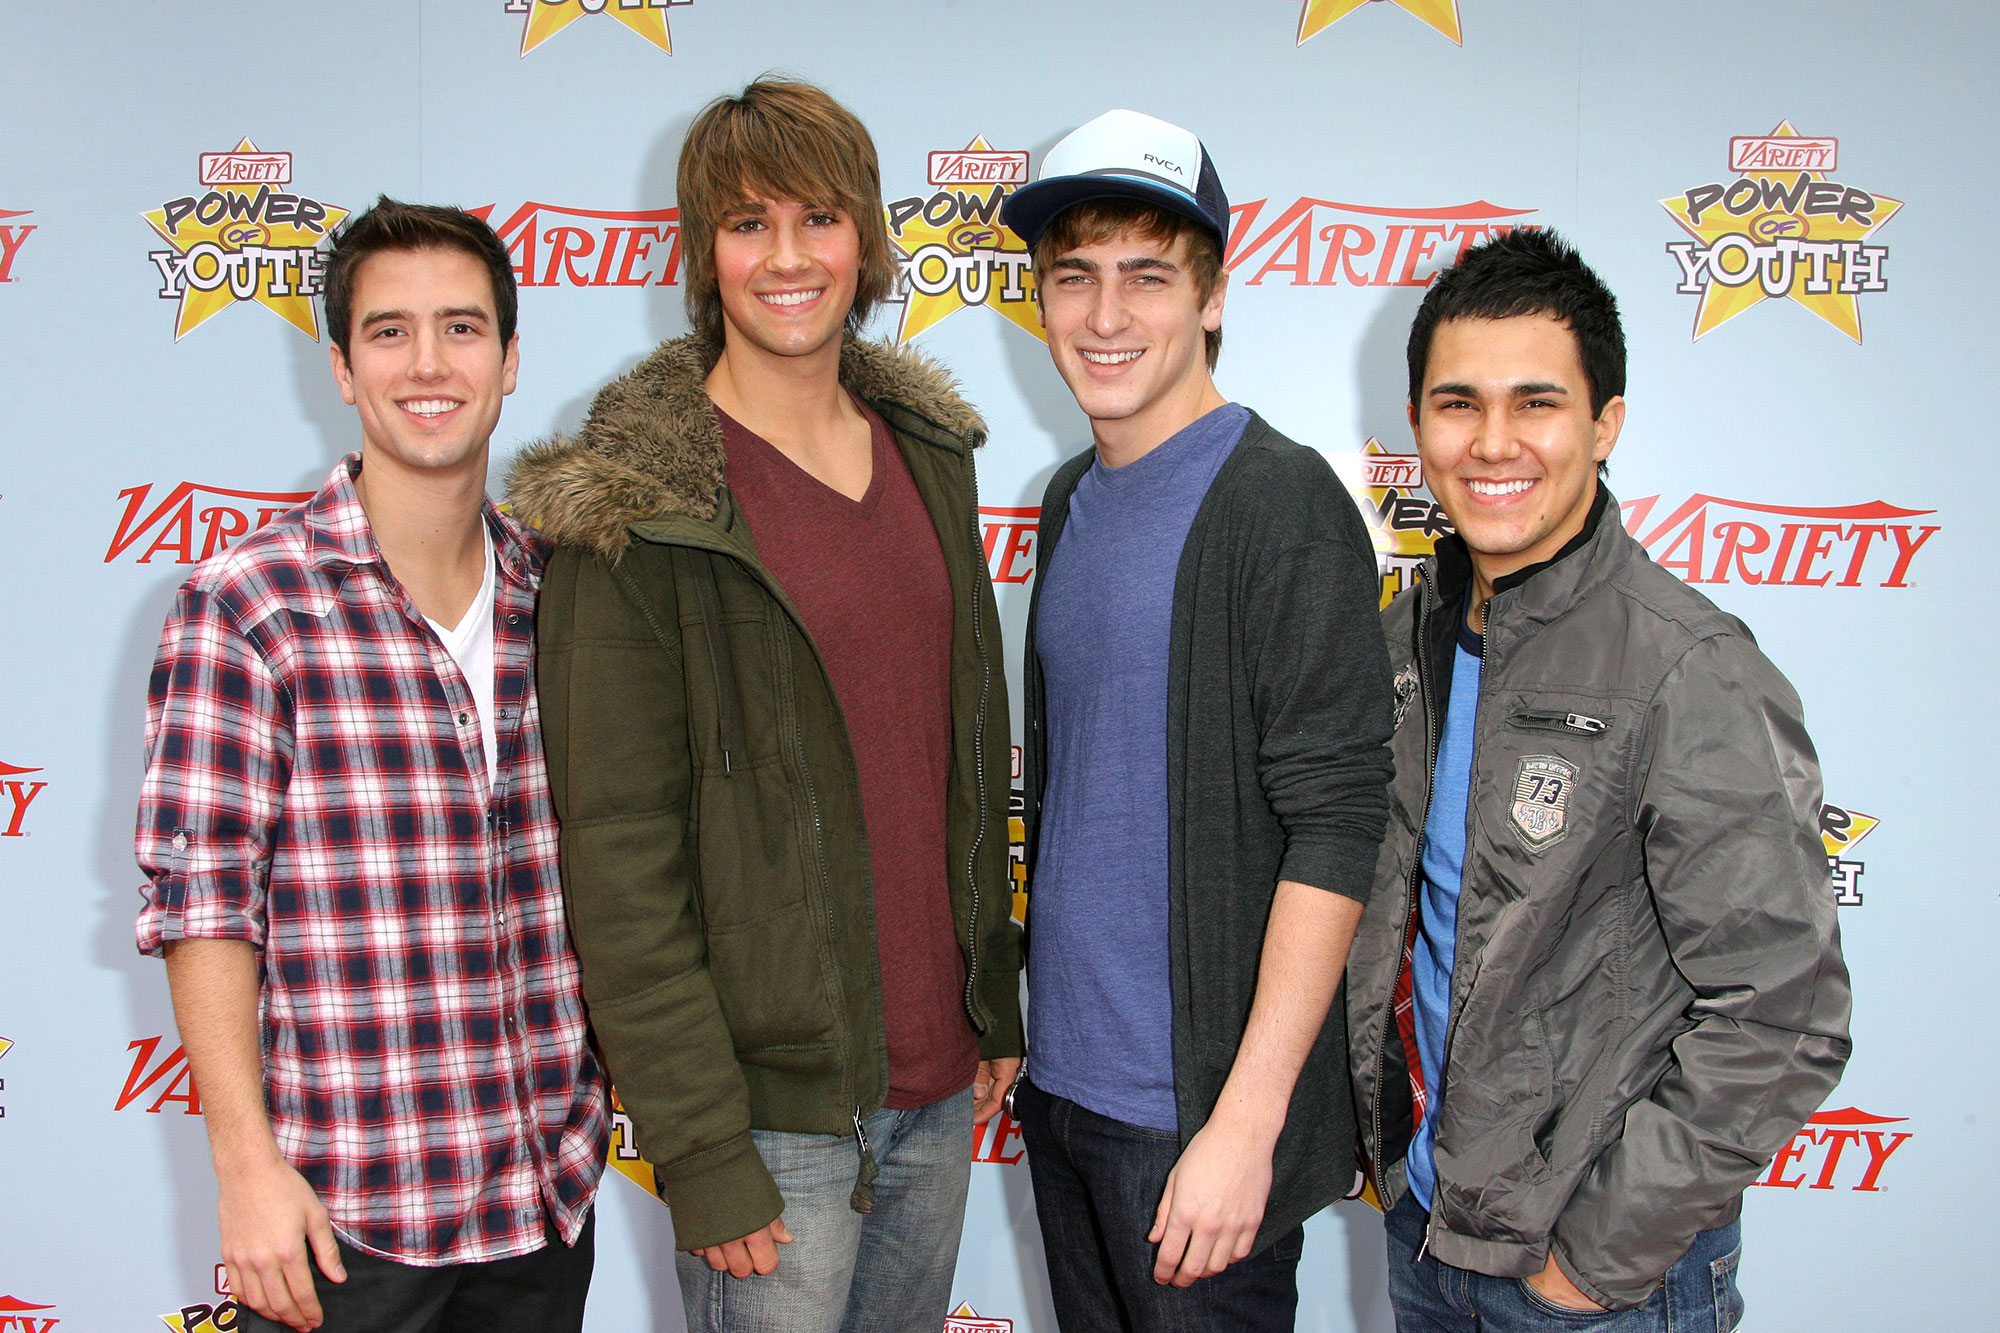 Big Time Rush Today: Transformation Photos Nickelodeon to Now | J-14